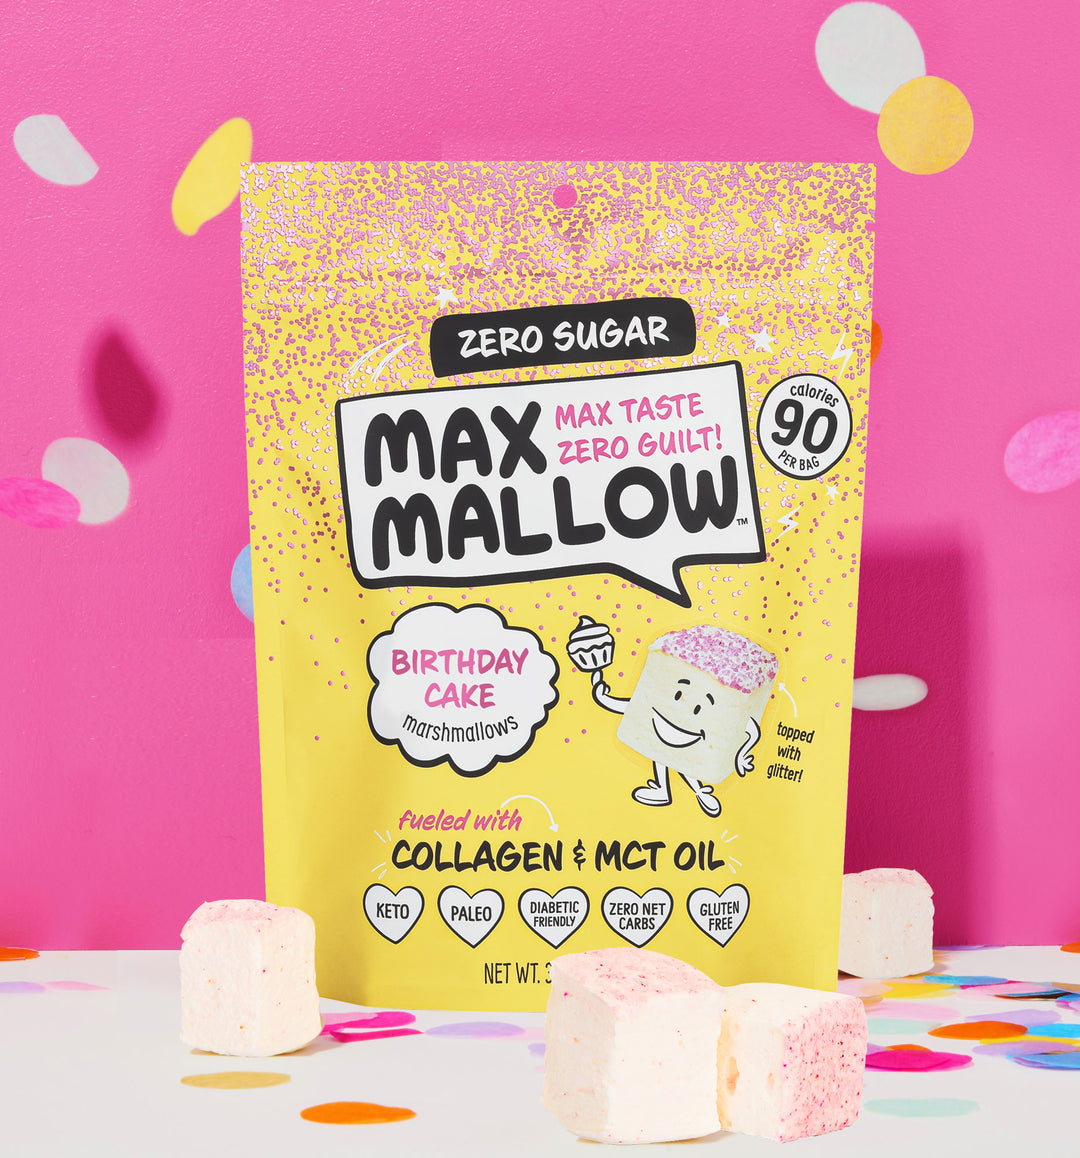 Decorative image of front view of Max Mollows Sugar Free Birthday Cake